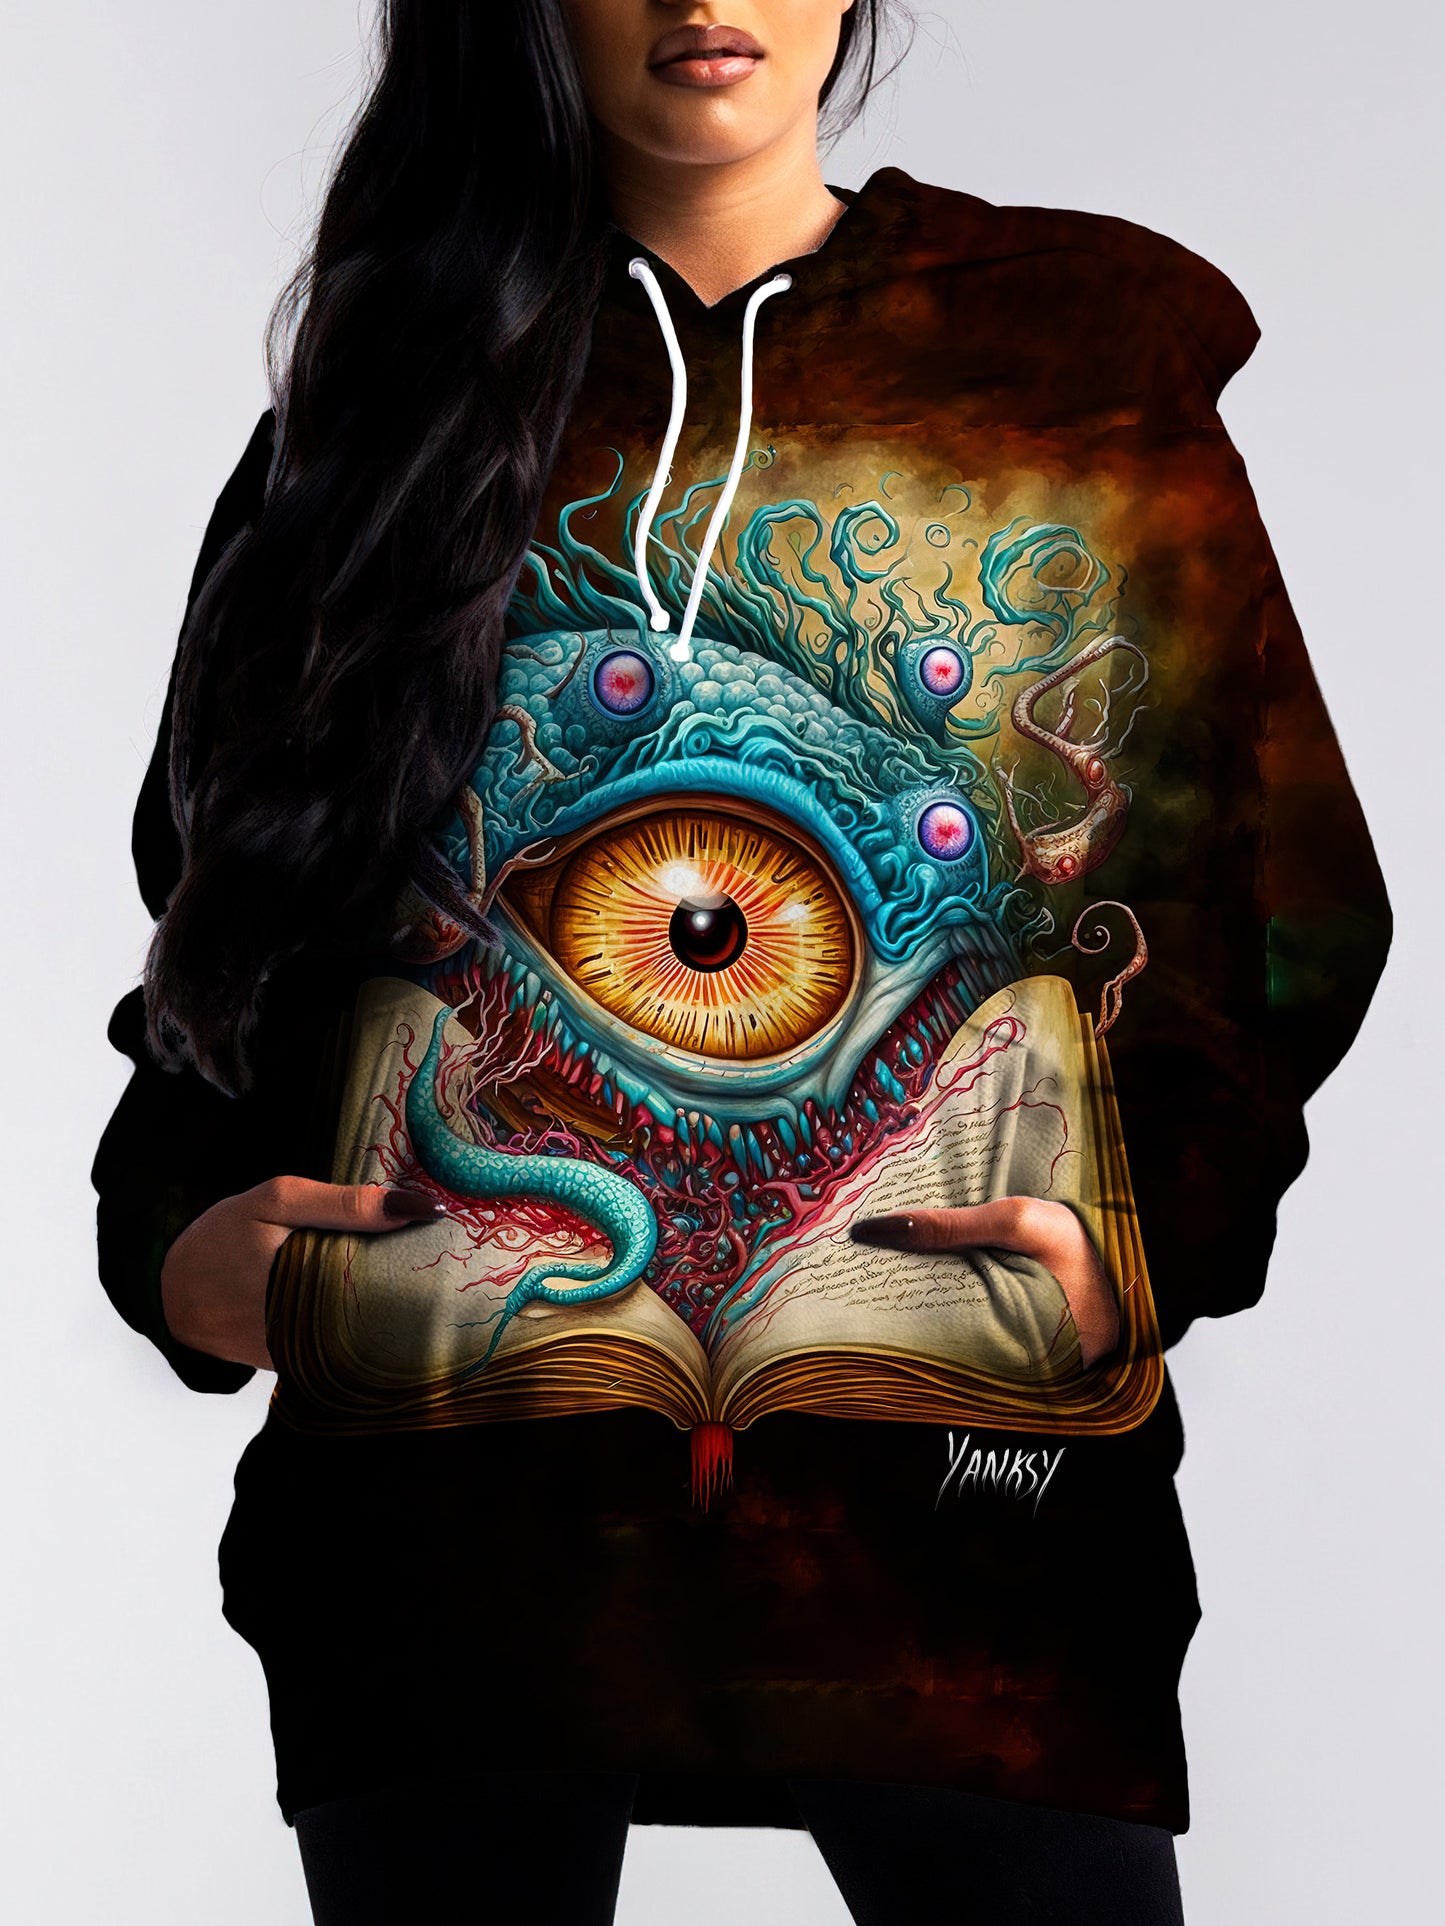 Express your creativity and unique style with this psychedelic sublimation pullover hoodie